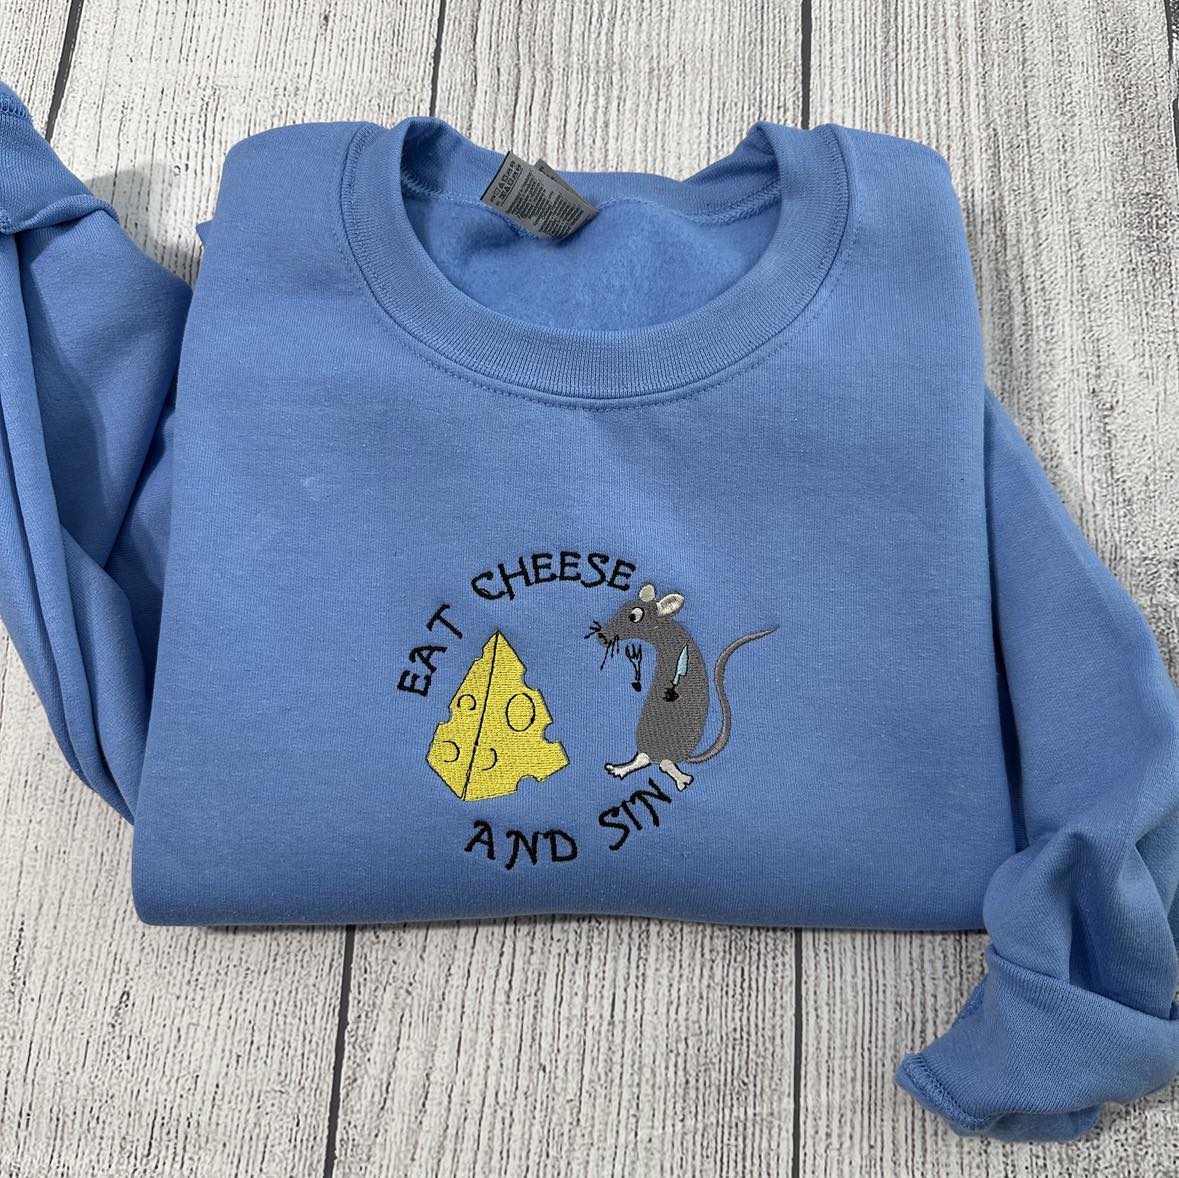 Eat Cheese and SIN Embroidered sweatshirt; funny embroidered crewneck